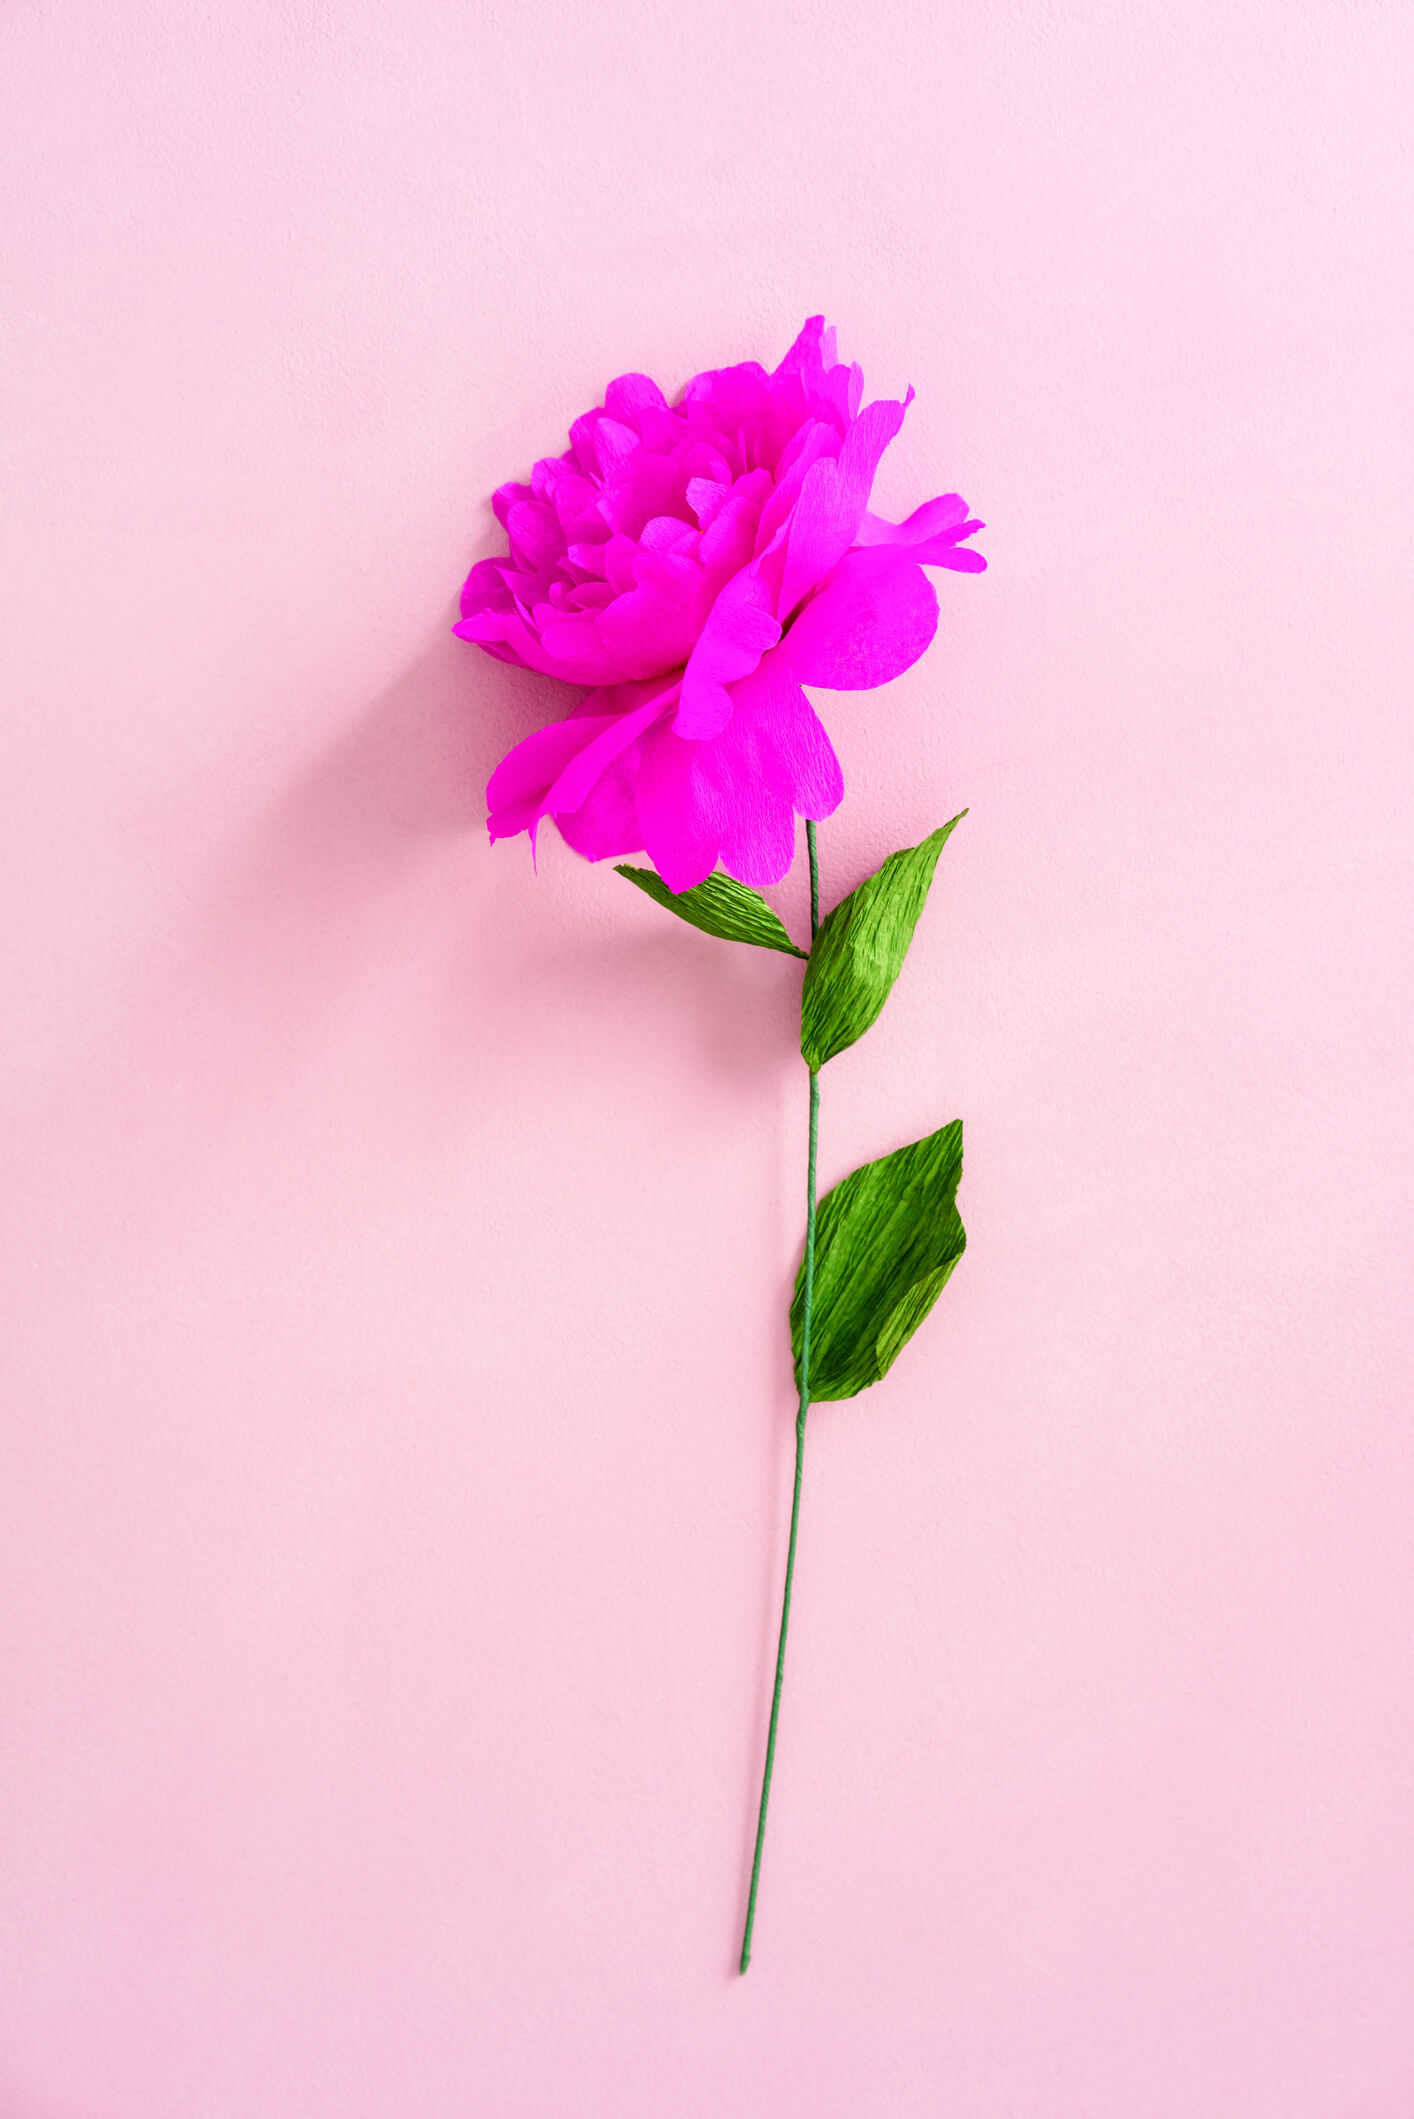 A single DIY crepe paper peony made with a bright purple crepe paper. The flower has a green stem and lays against a pink background.